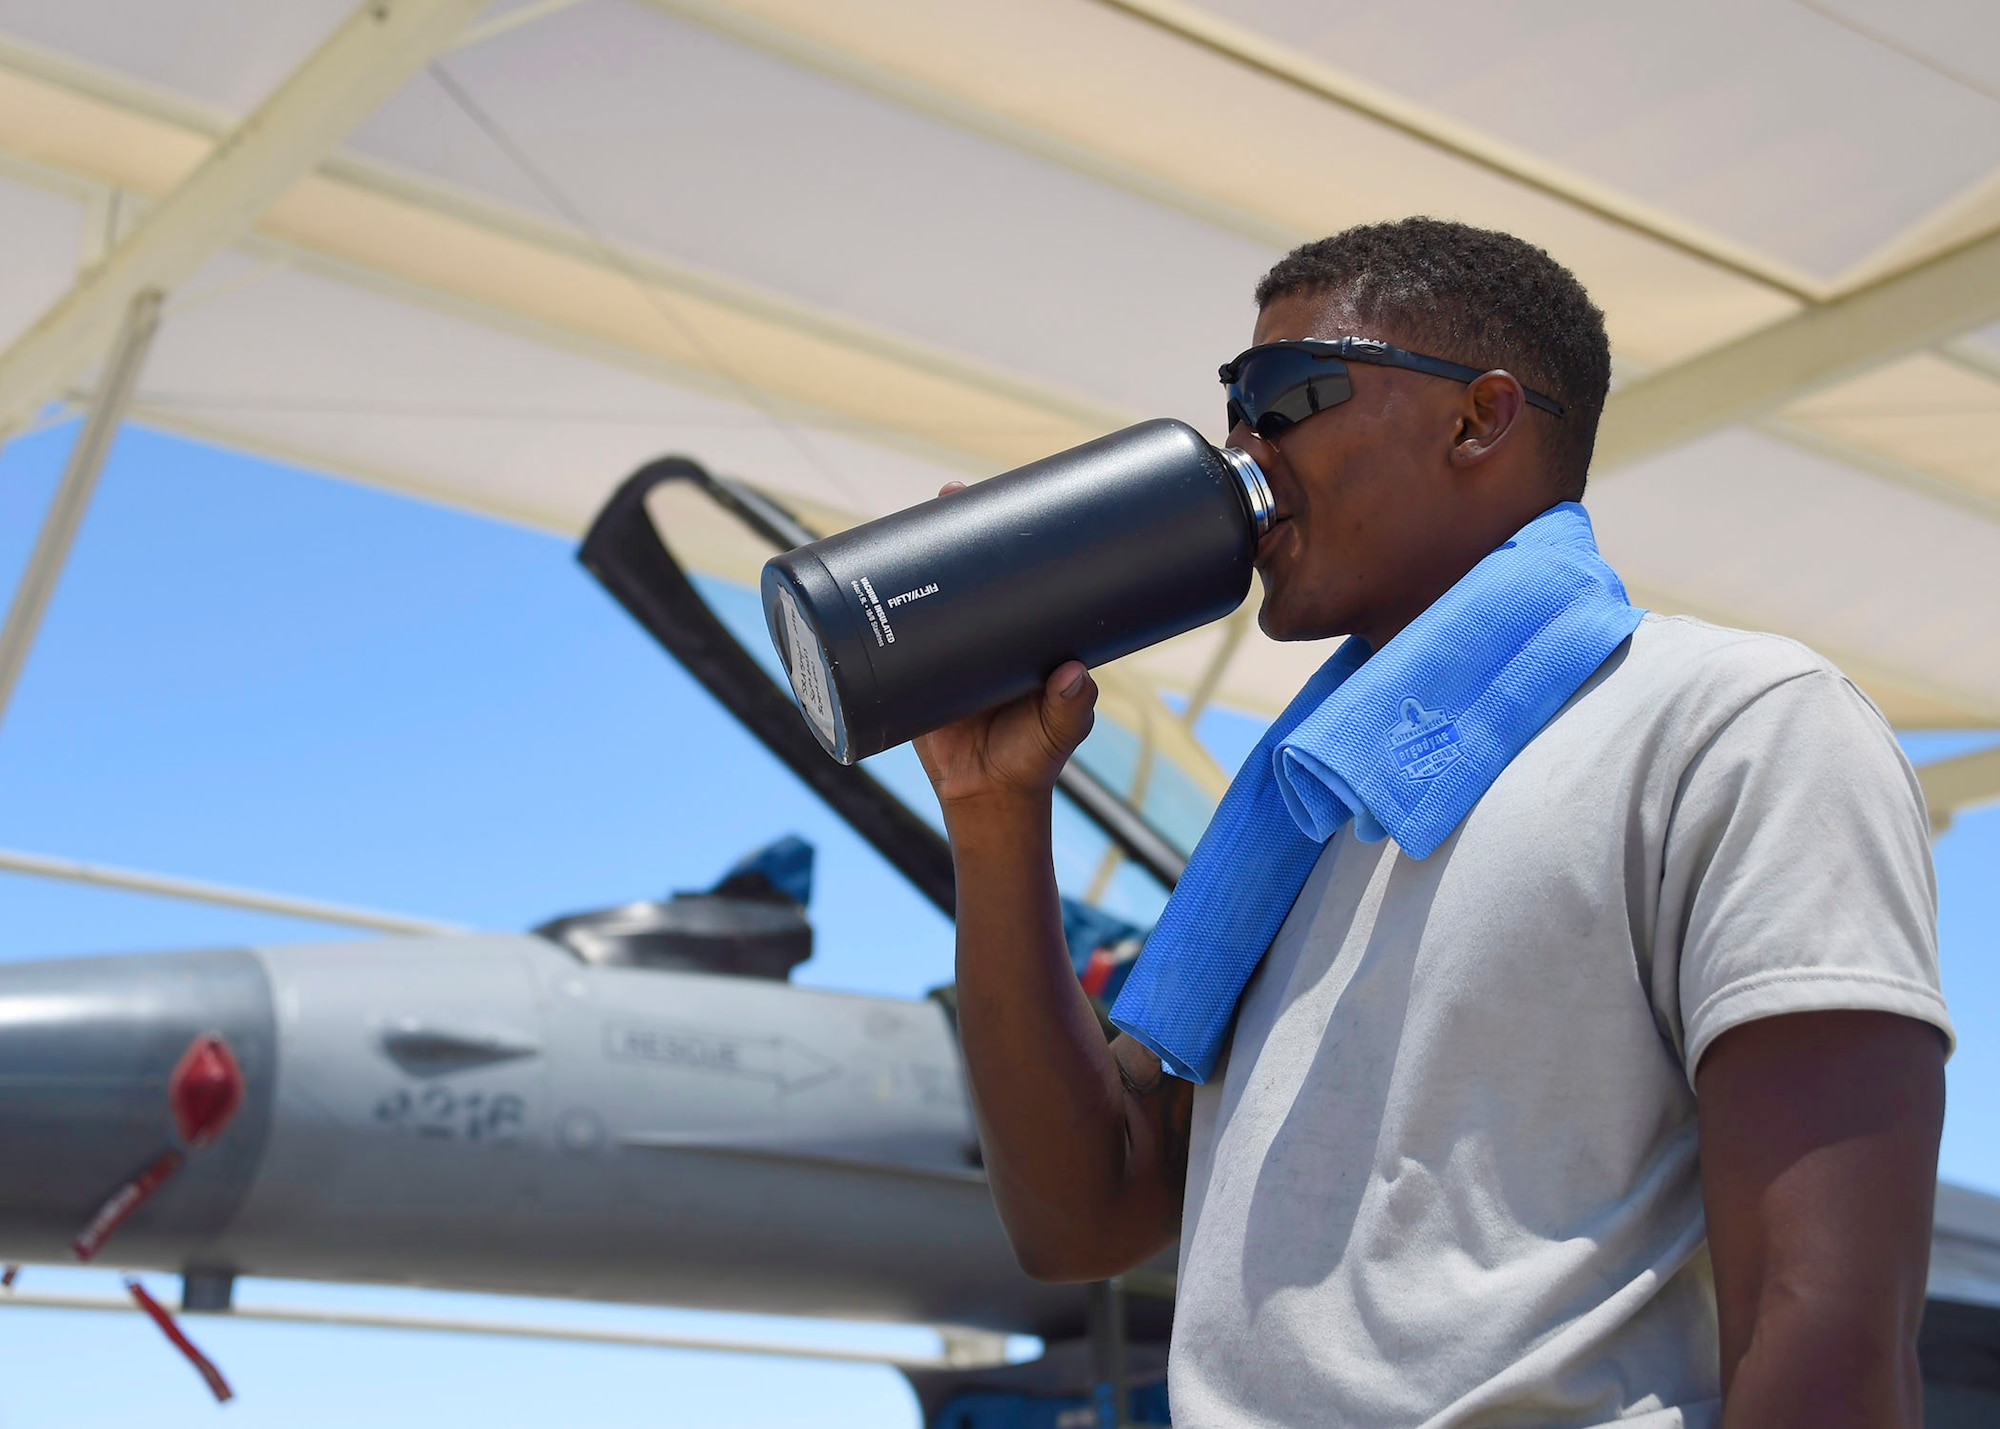 Senior Airman Lakenzar Snipes, 309th Aircraft Maintenance Unit crew chief, takes a water break while maintaining an F-16 June 15, 2017, at Luke Air Force Base, Ariz. With temperatures exceeding 100 degrees, sunshades keep both the Airmen who maintain the aircraft and the jets themselves cooler. (U.S. Air Force photo by Senior Airman James Hensley)